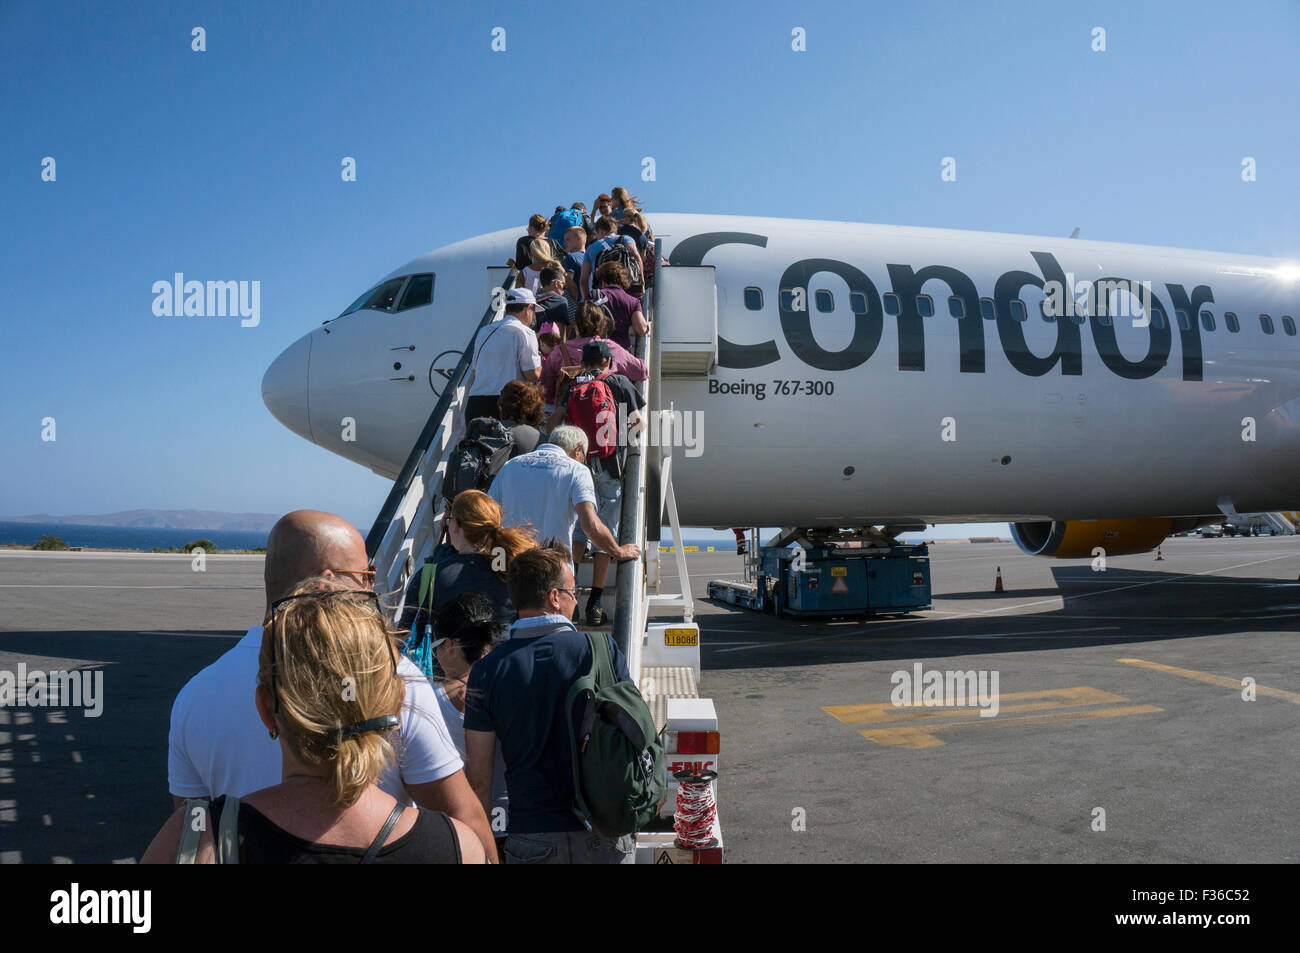 An aircraft of the airline Condor at the airport Heraklion in Crete. Passengers just boarding the plane over a gangway. Stock Photo